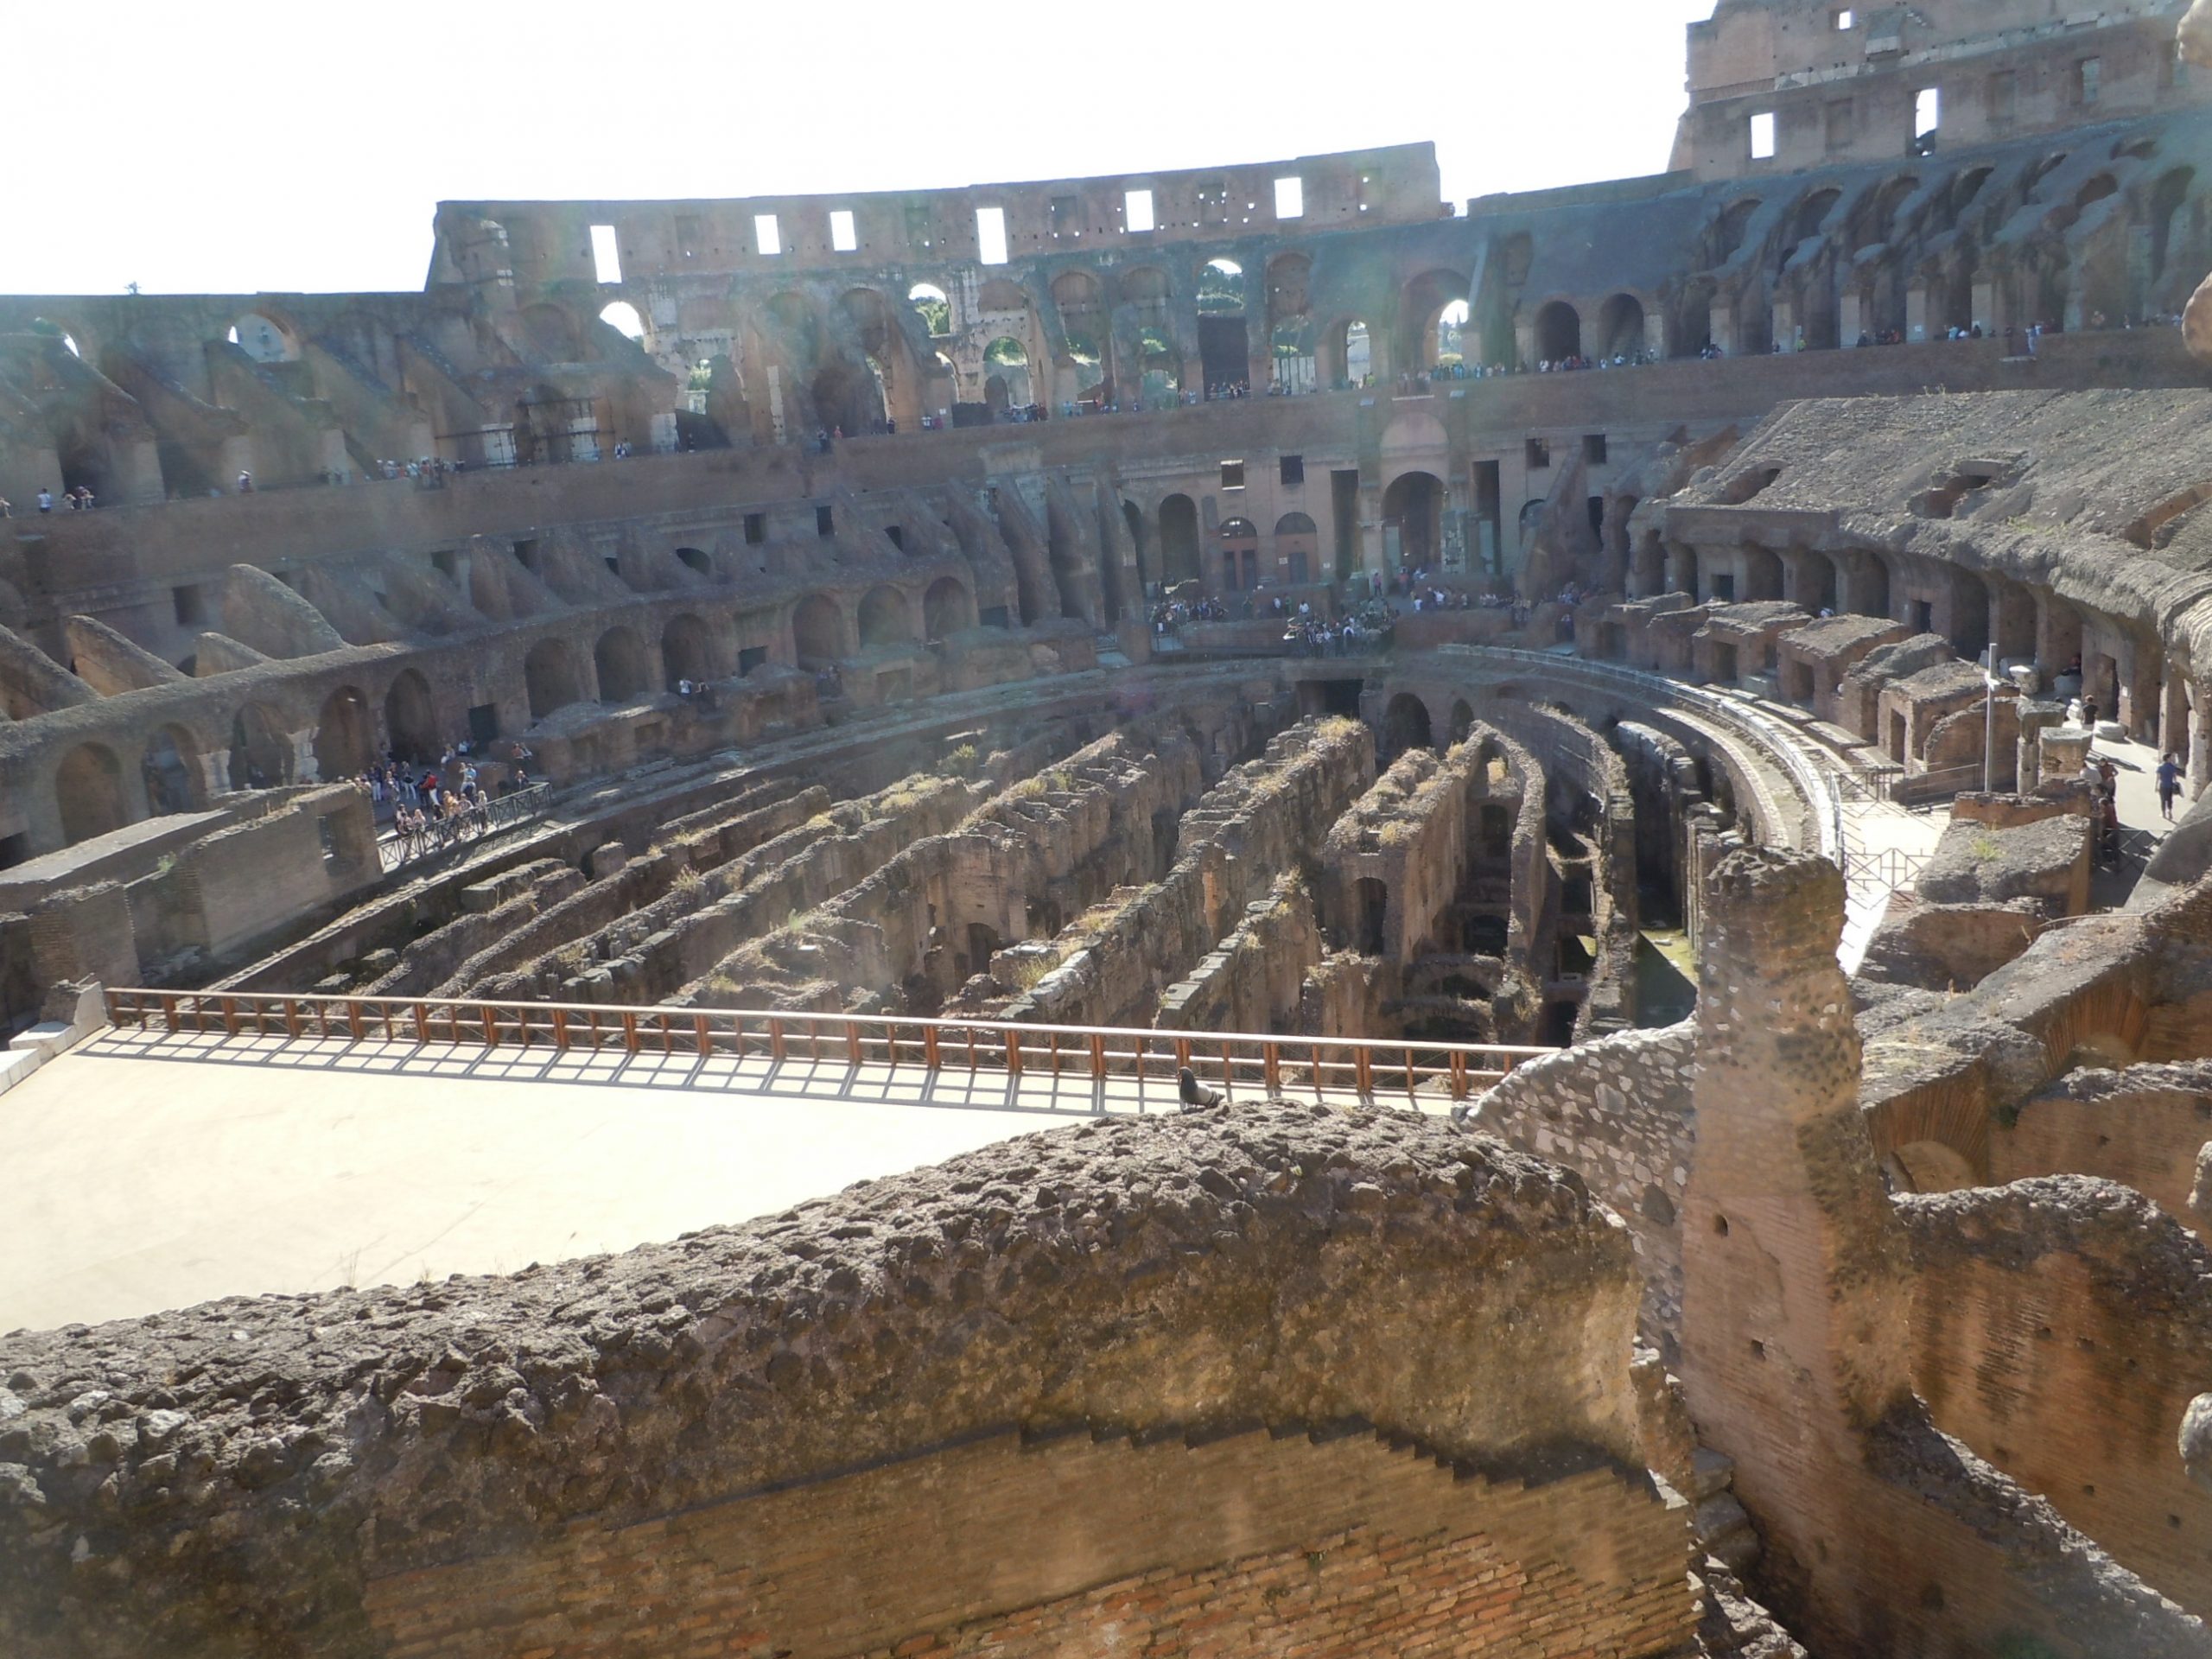 the Colosseum could hold between 50,000 and 80,000 spectators